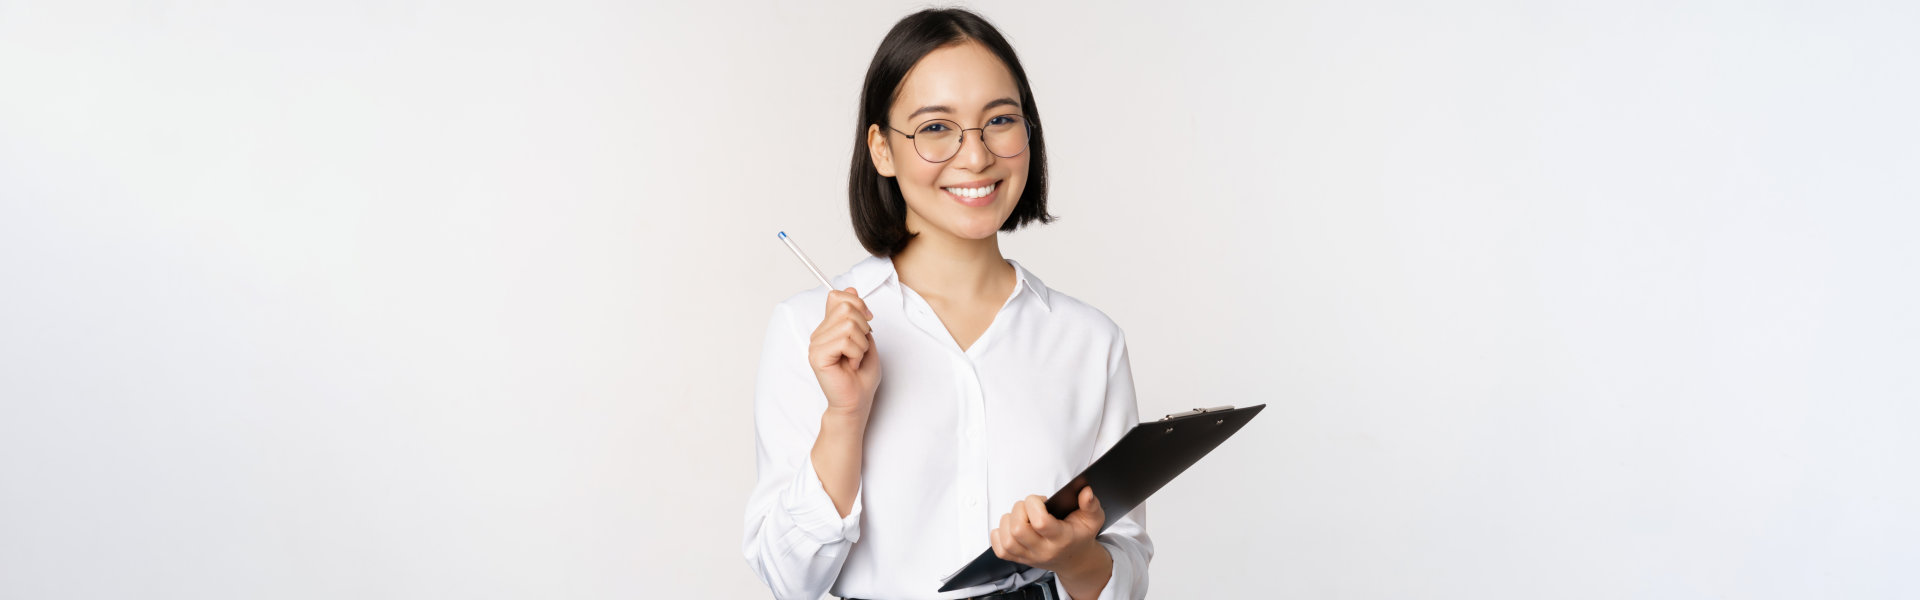 woman holding a clipboard and a pen smiling